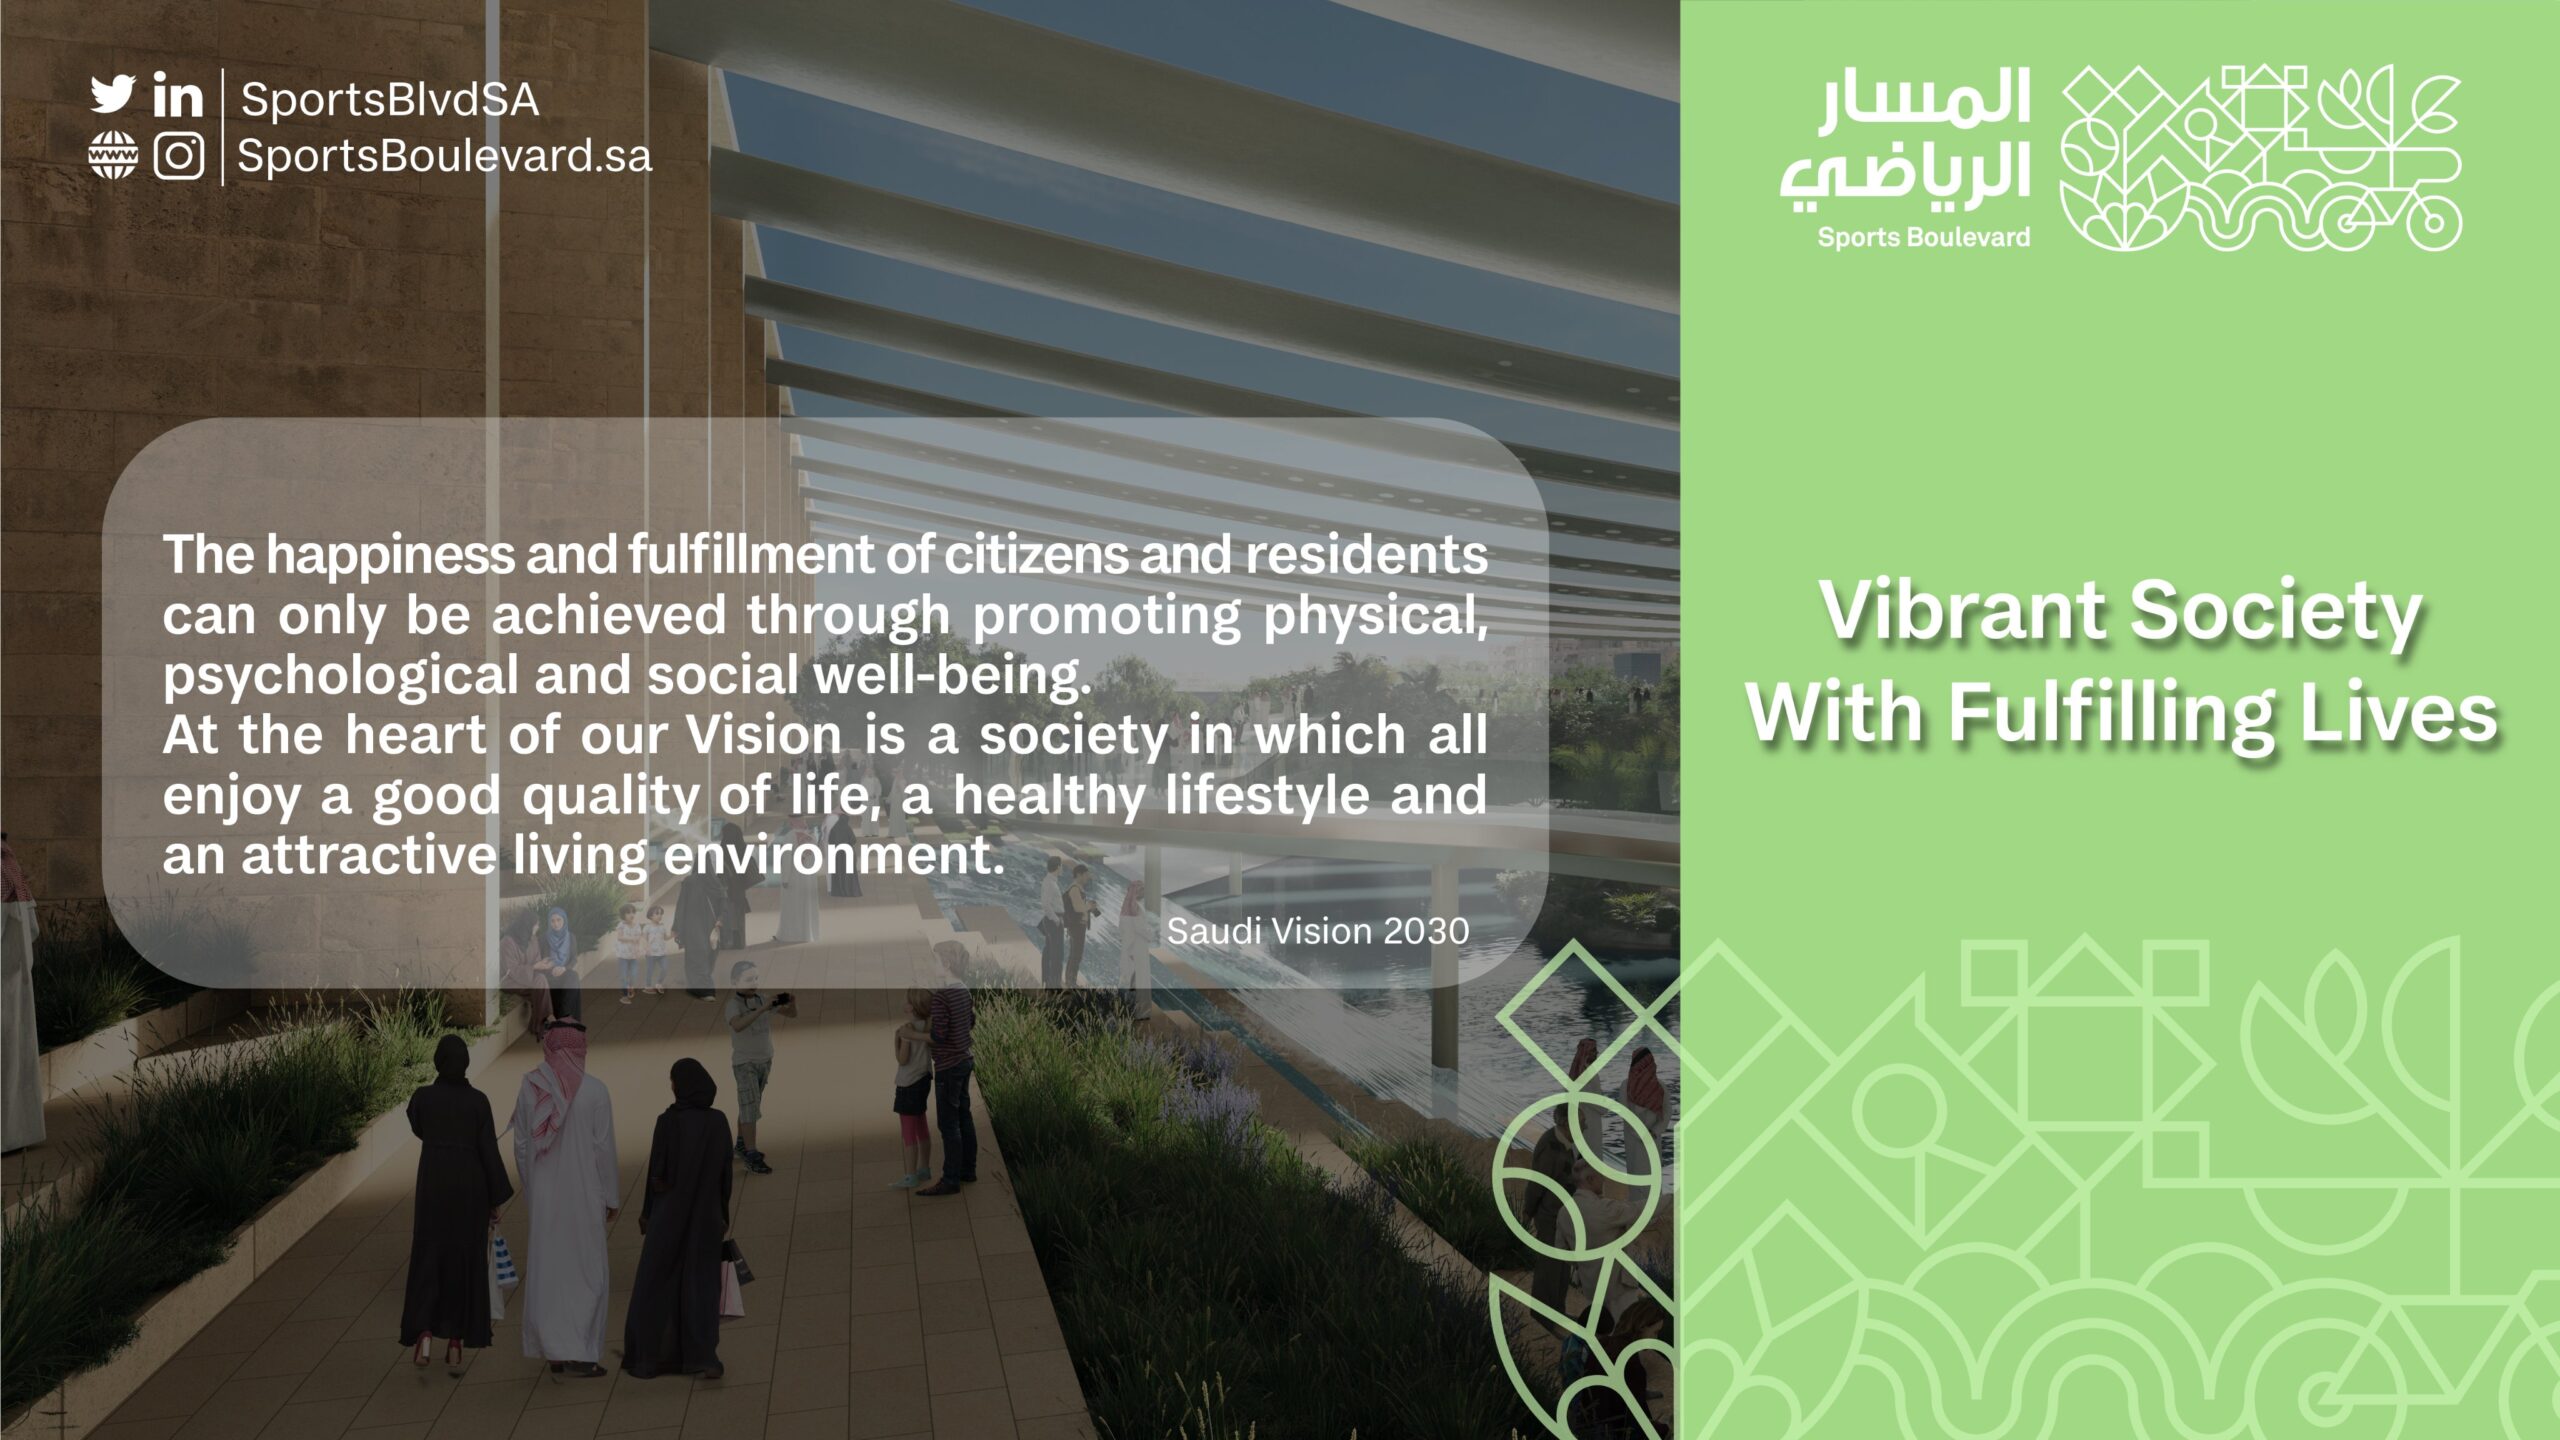 The vision of #Sports_Boulevard centered on building an ambience rich with sport, art, cultural, recreational activities, in line with #Saudivision2030  pillar that focuses on vibrant society in which all enjoy a healthy lifestyle and an attractive living environment